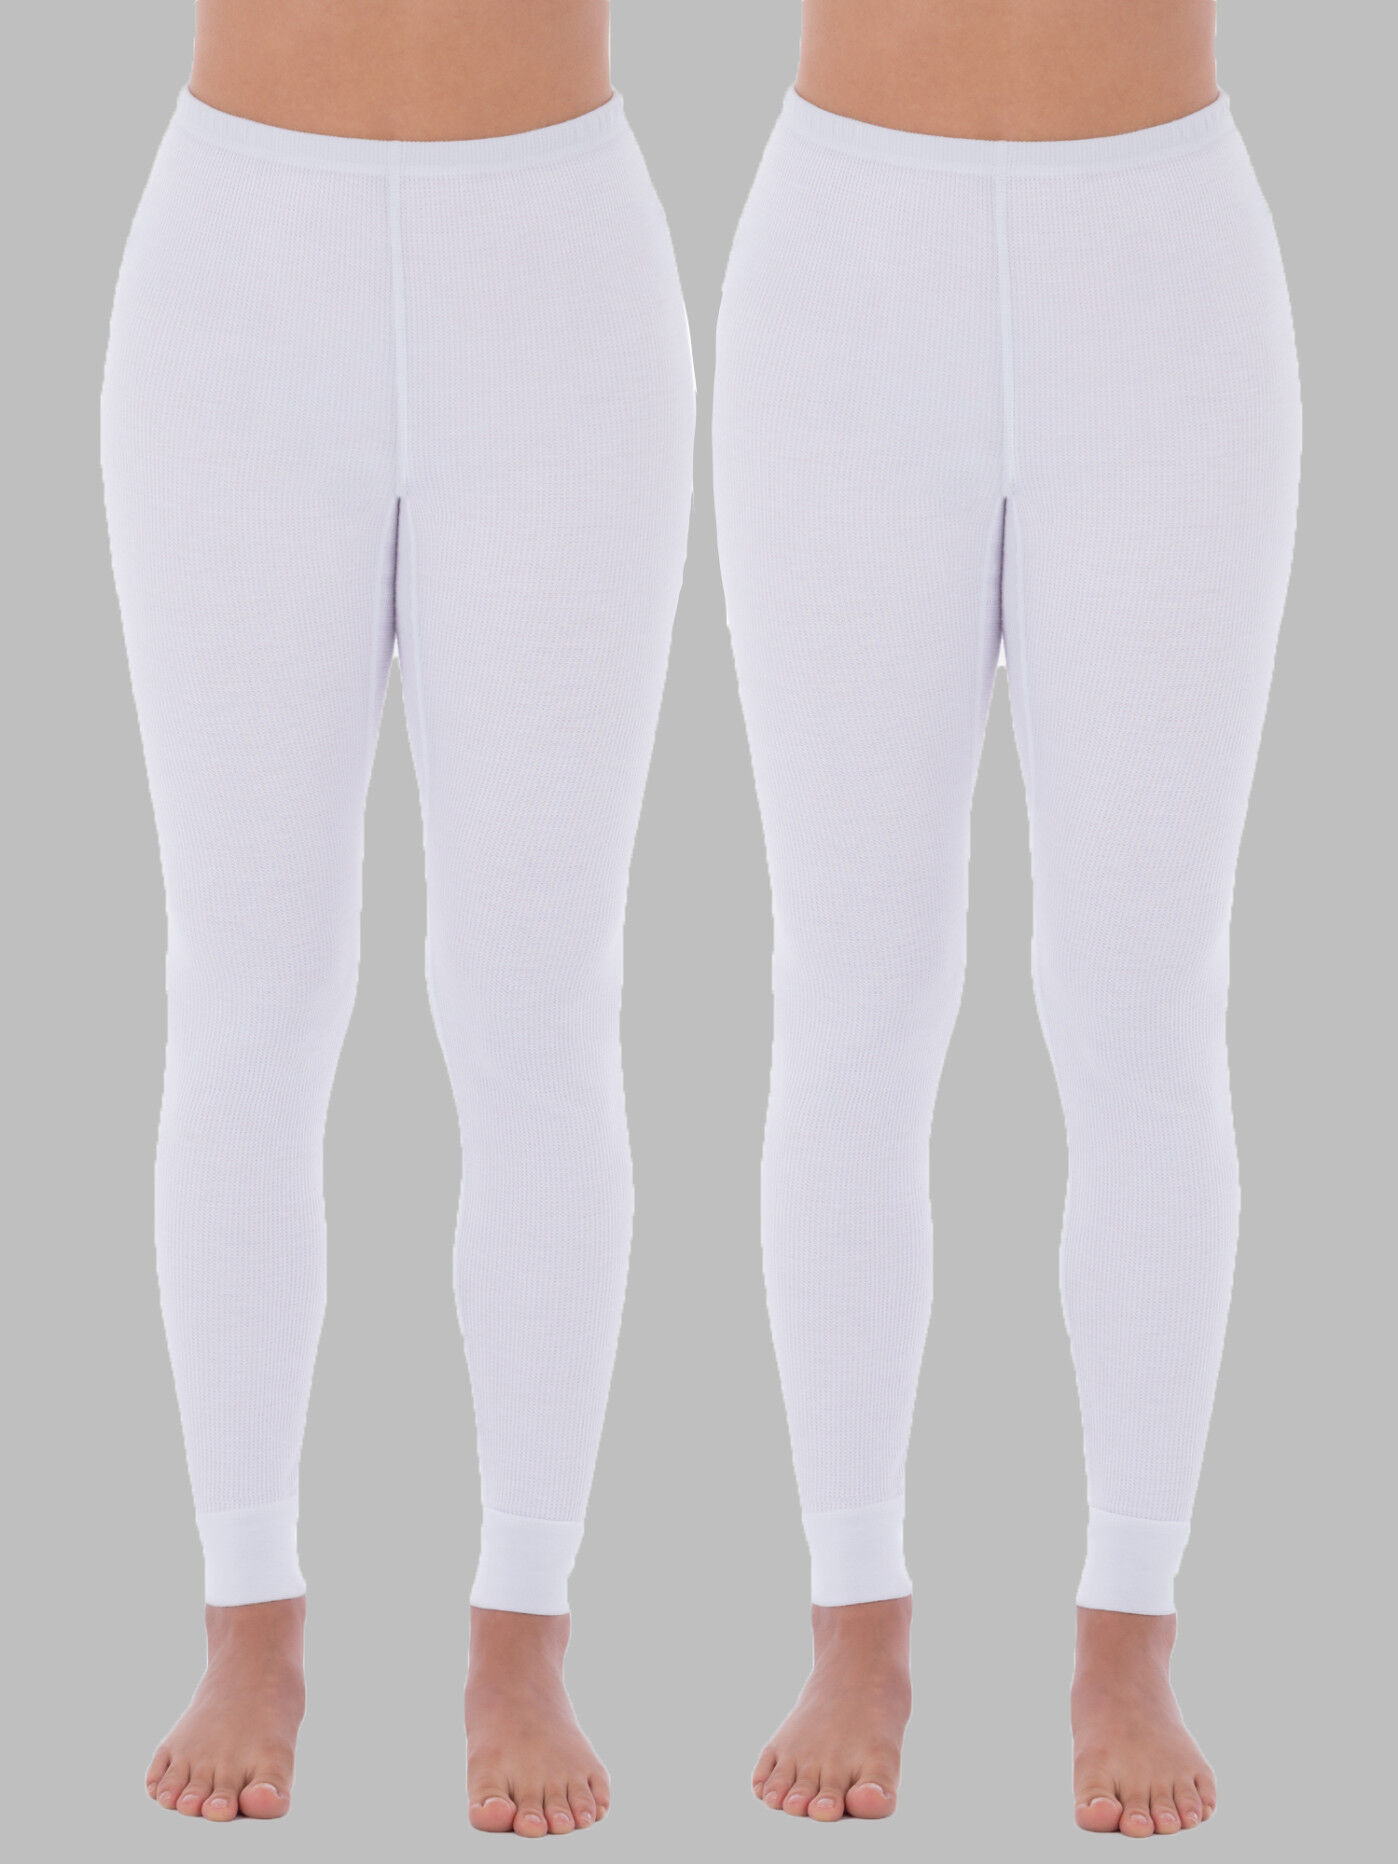 Women's Thermal Bottoms | Fruit of the Loom Thermal Bottoms